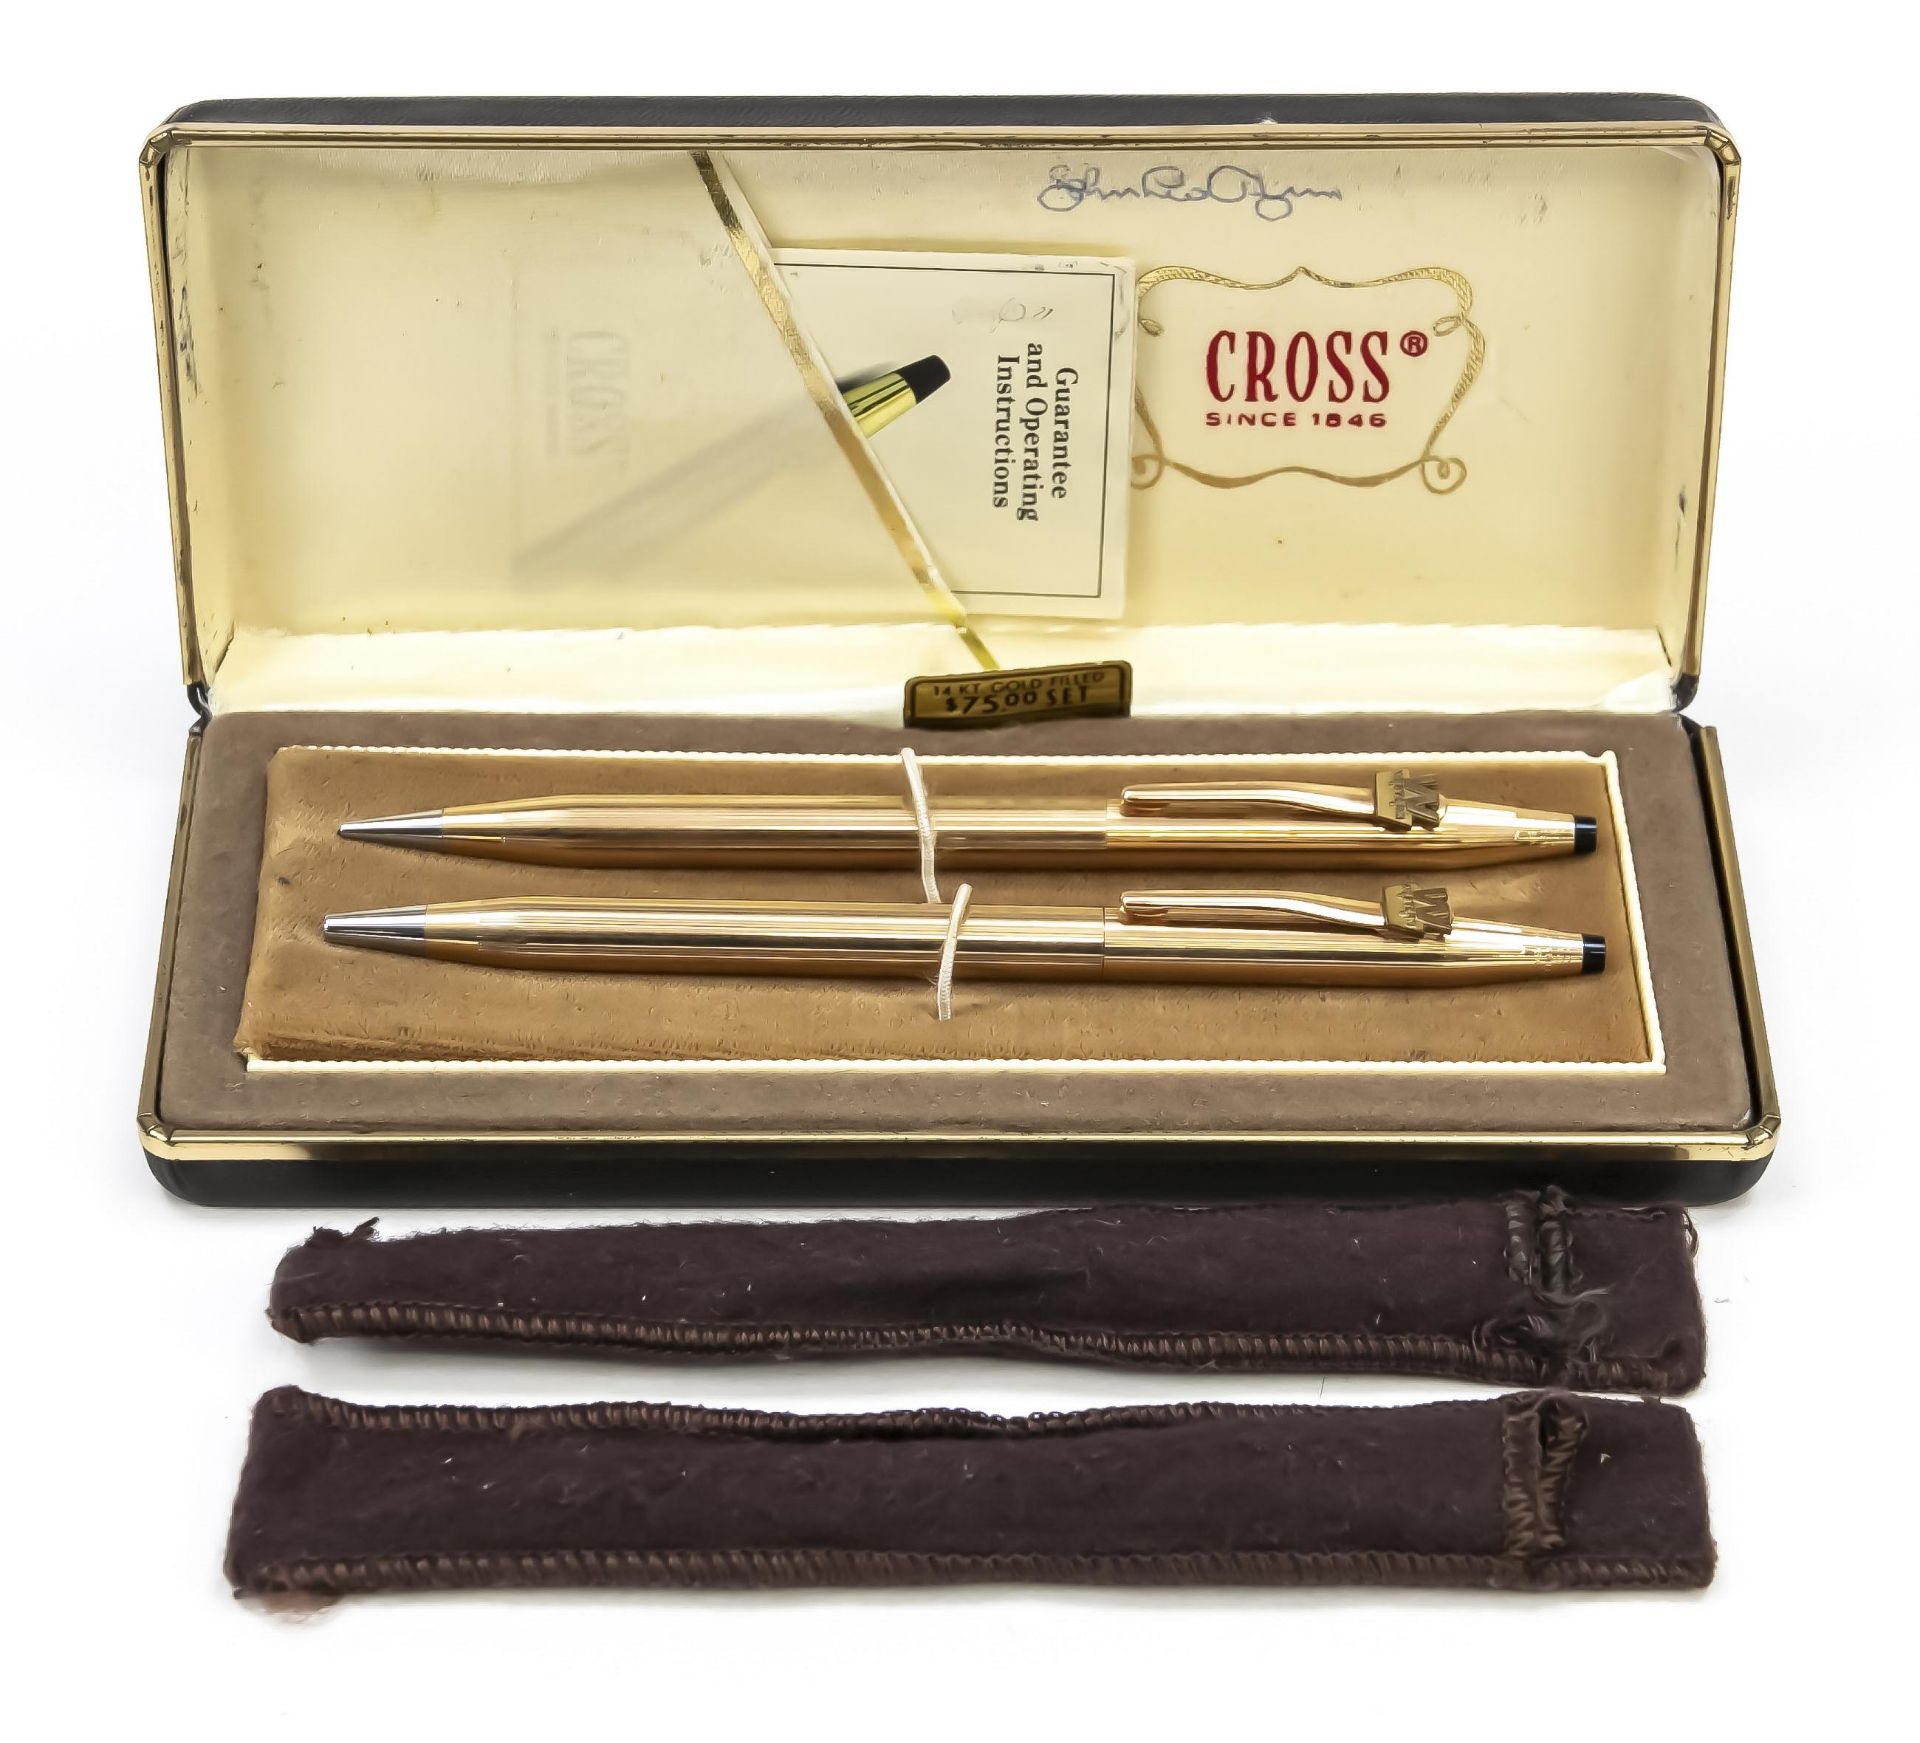 Two-piece writing set, Cross, Made in USA, 2nd half of 20th century, 14 ct hard gold plated case